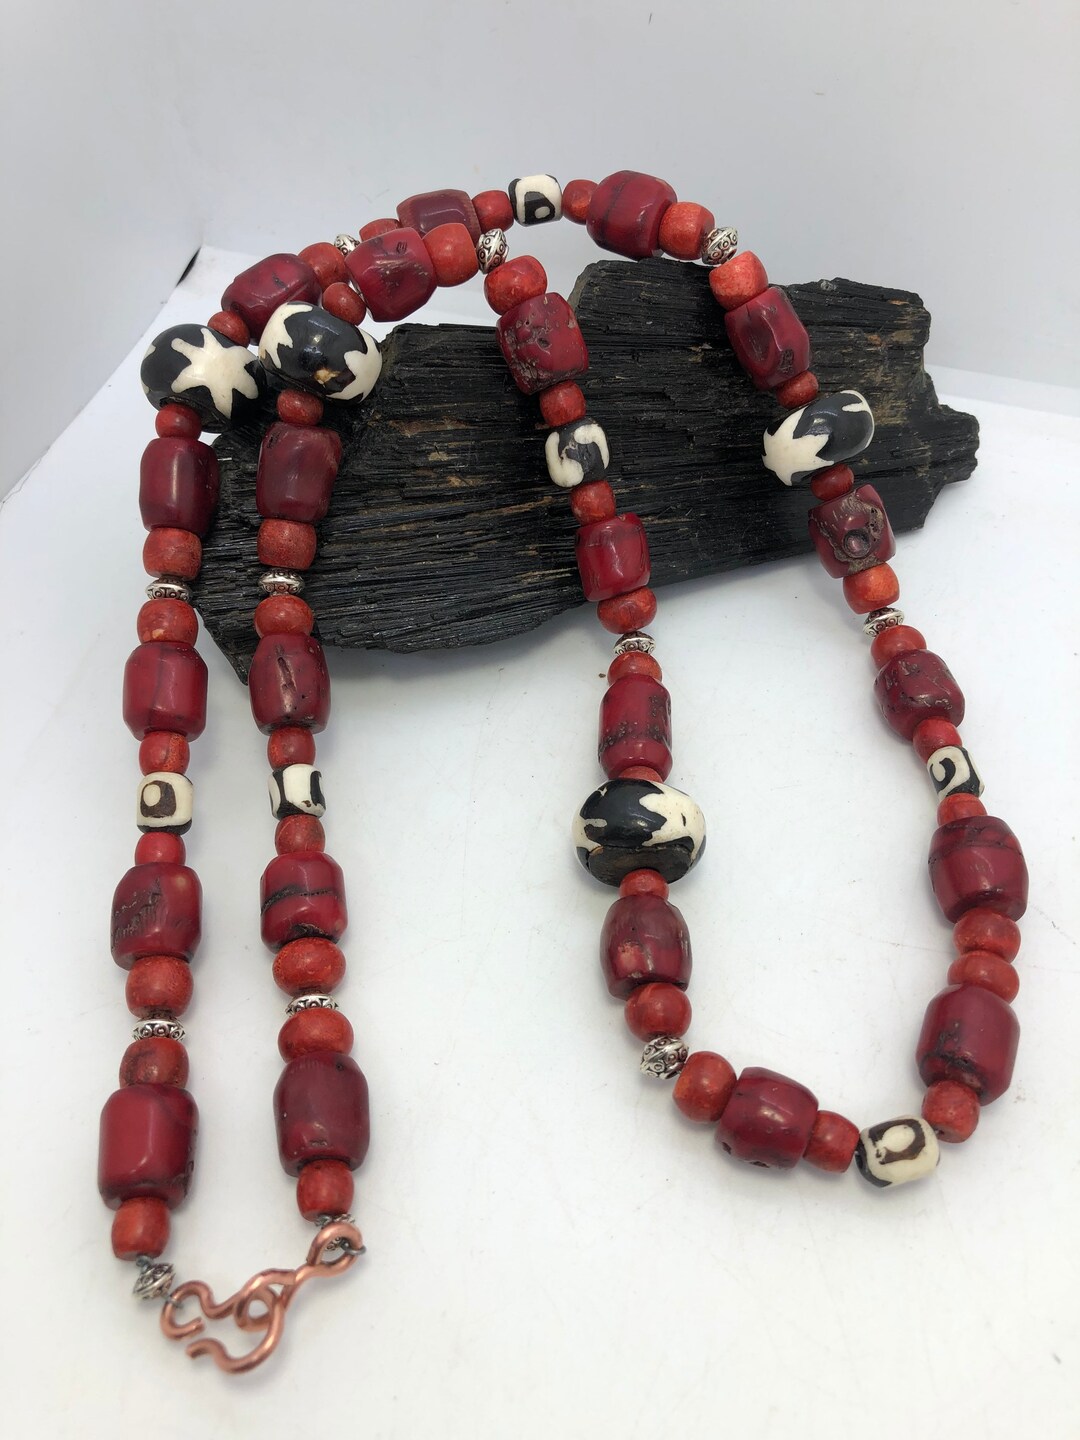 34 Inch Red Coral and African Bone Beads Beaded Necklace FREE - Etsy